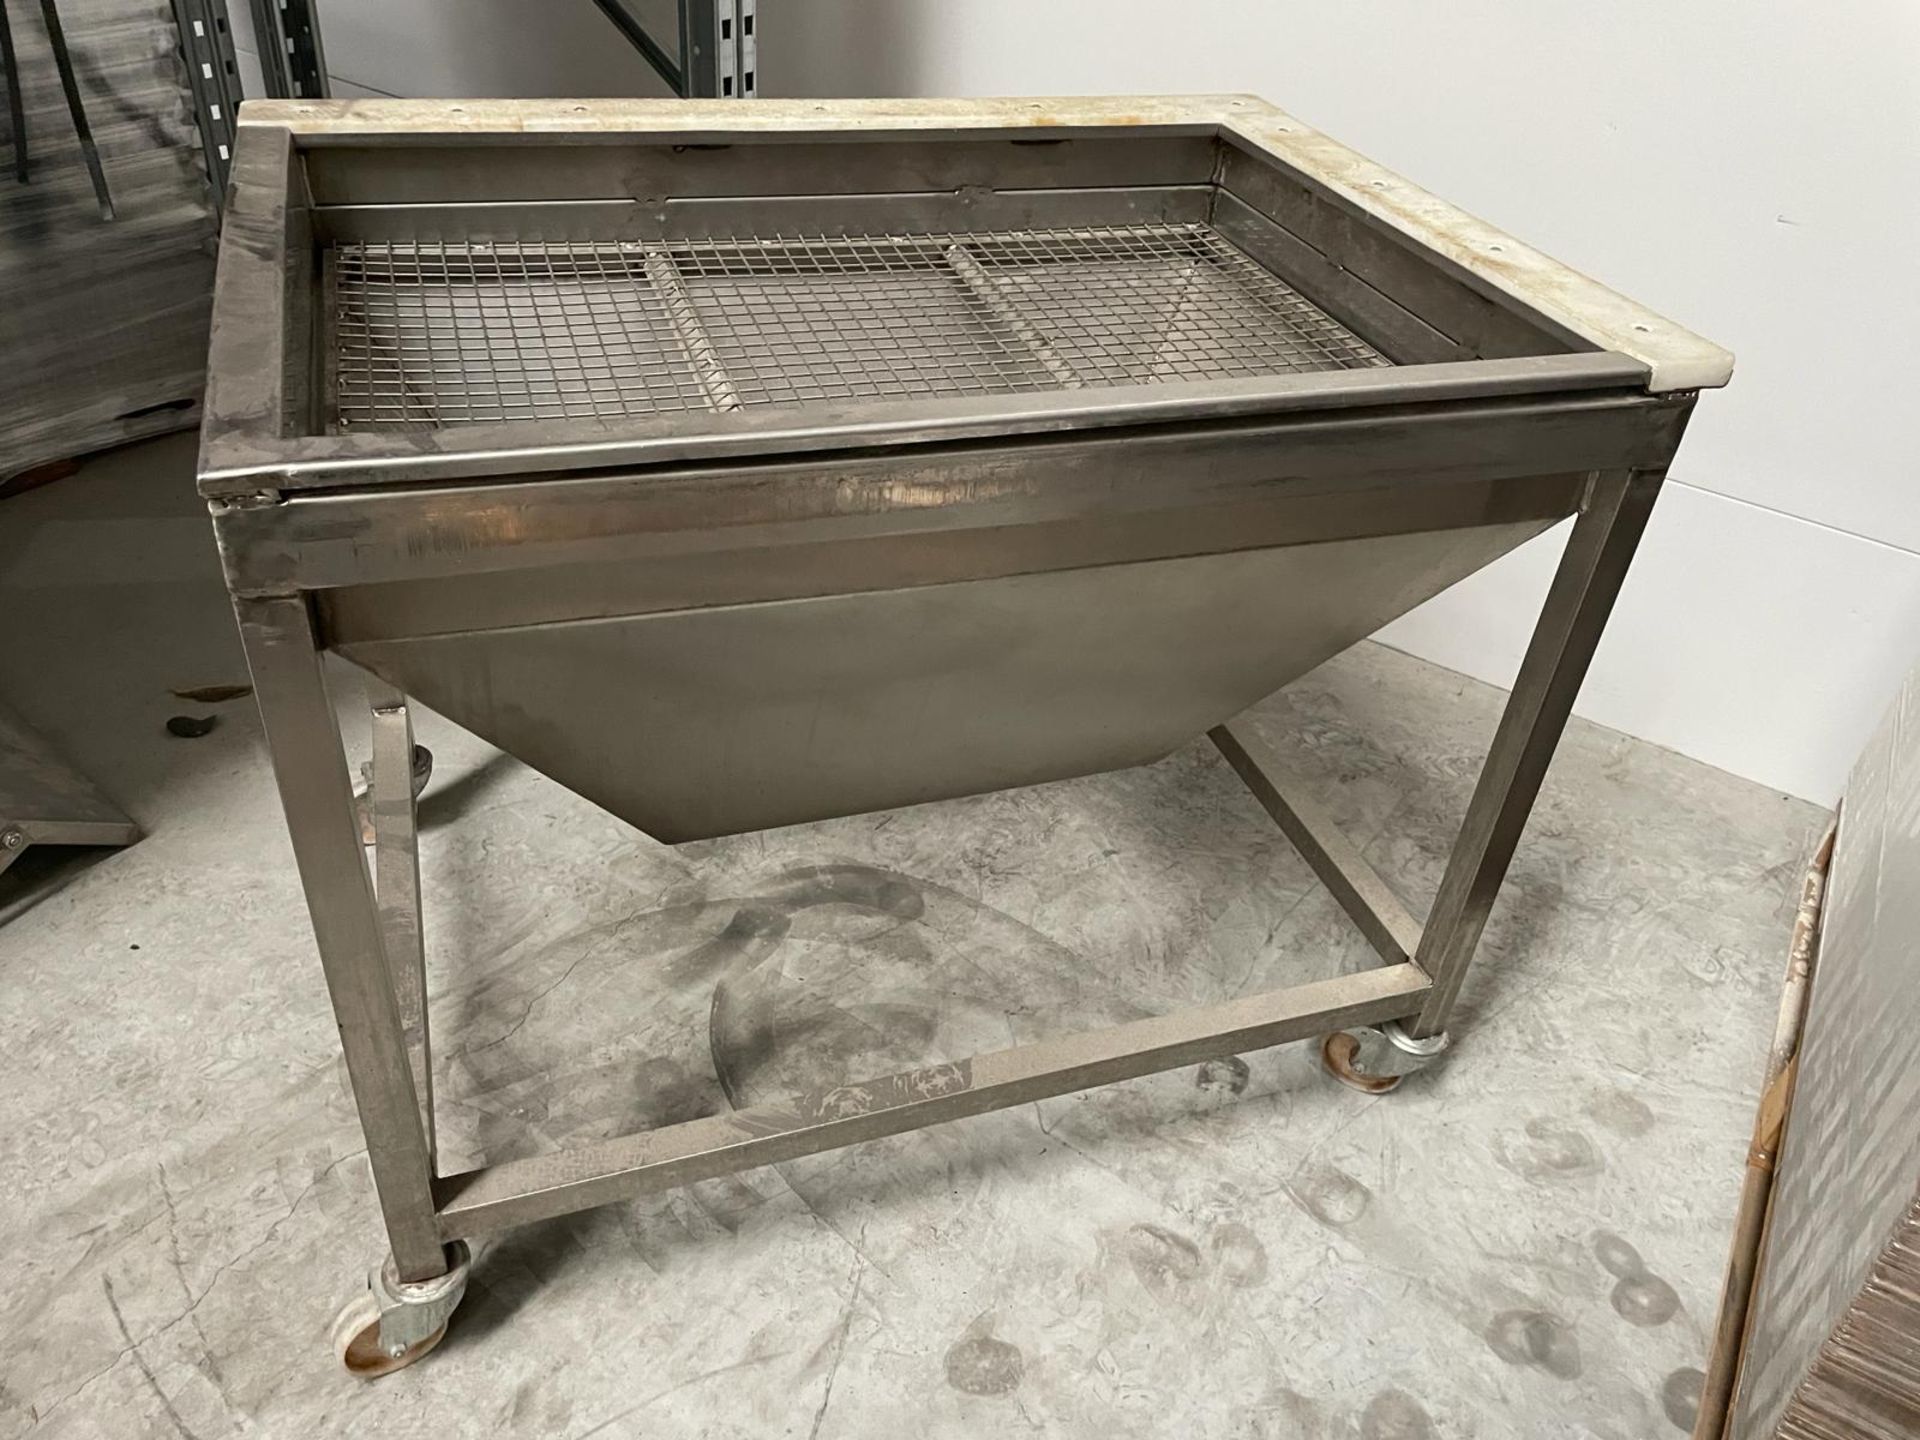 Stainless Steel tapered chute with grid top, potential wash down unit. 1100 x 850 mm. Please note - Image 2 of 2